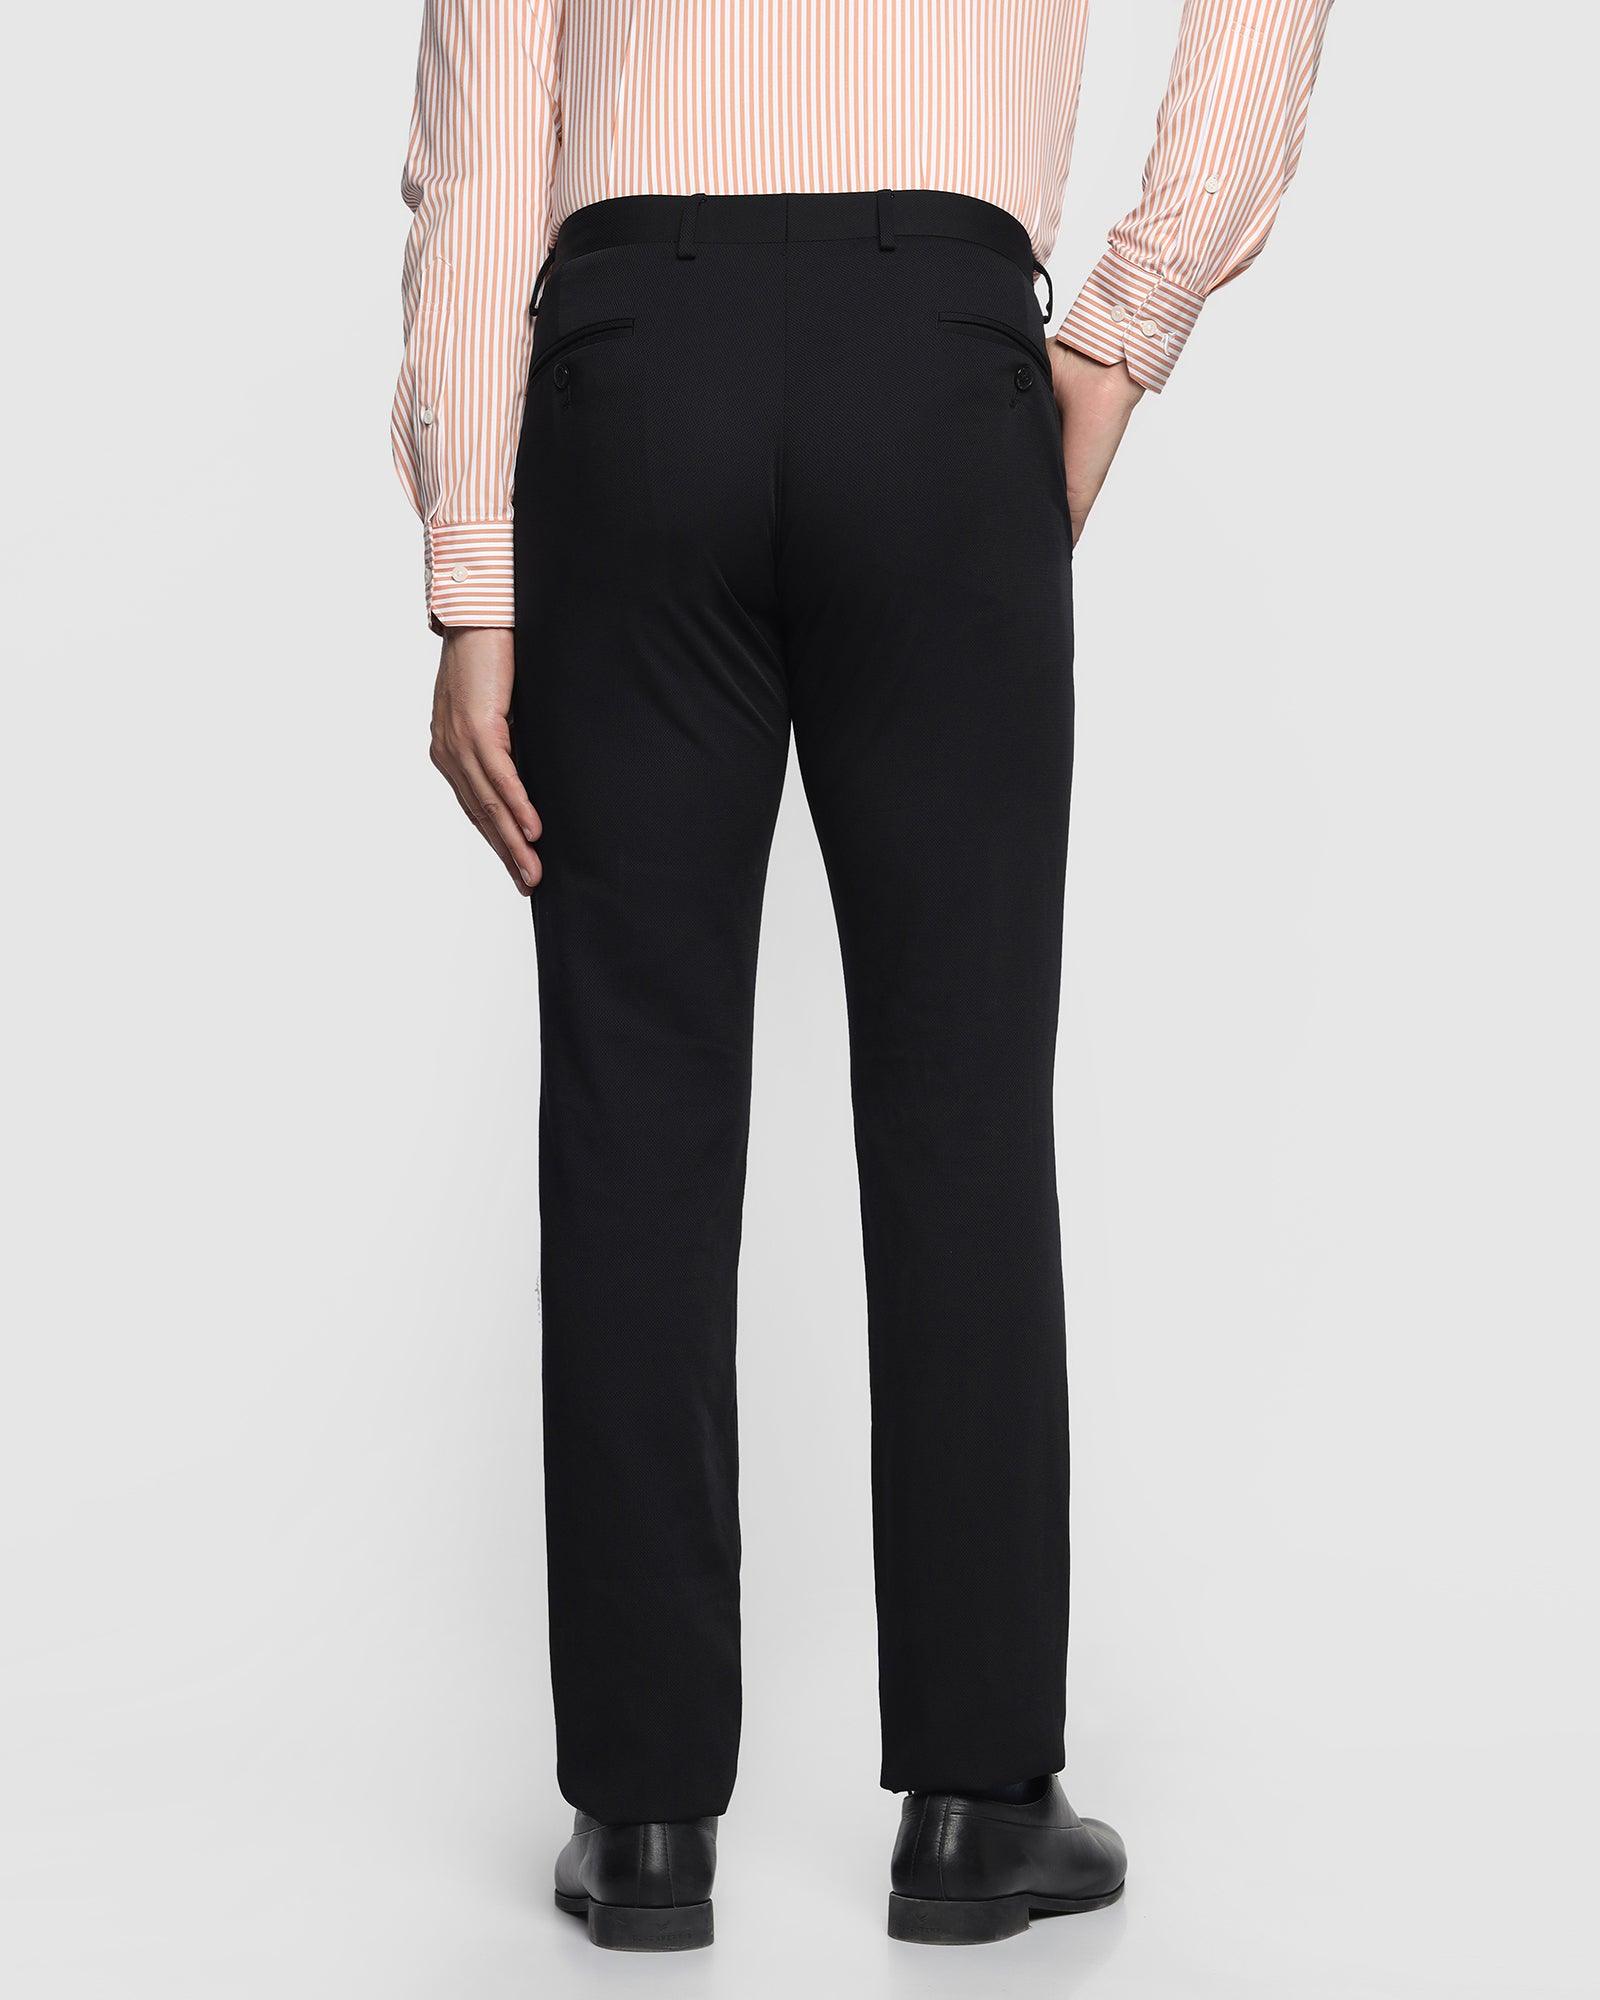 Go Colors Women Black Skinny Fit Cotton Stretch Pants Buy Go Colors Women  Black Skinny Fit Cotton Stretch Pants Online at Best Price in India  Nykaa